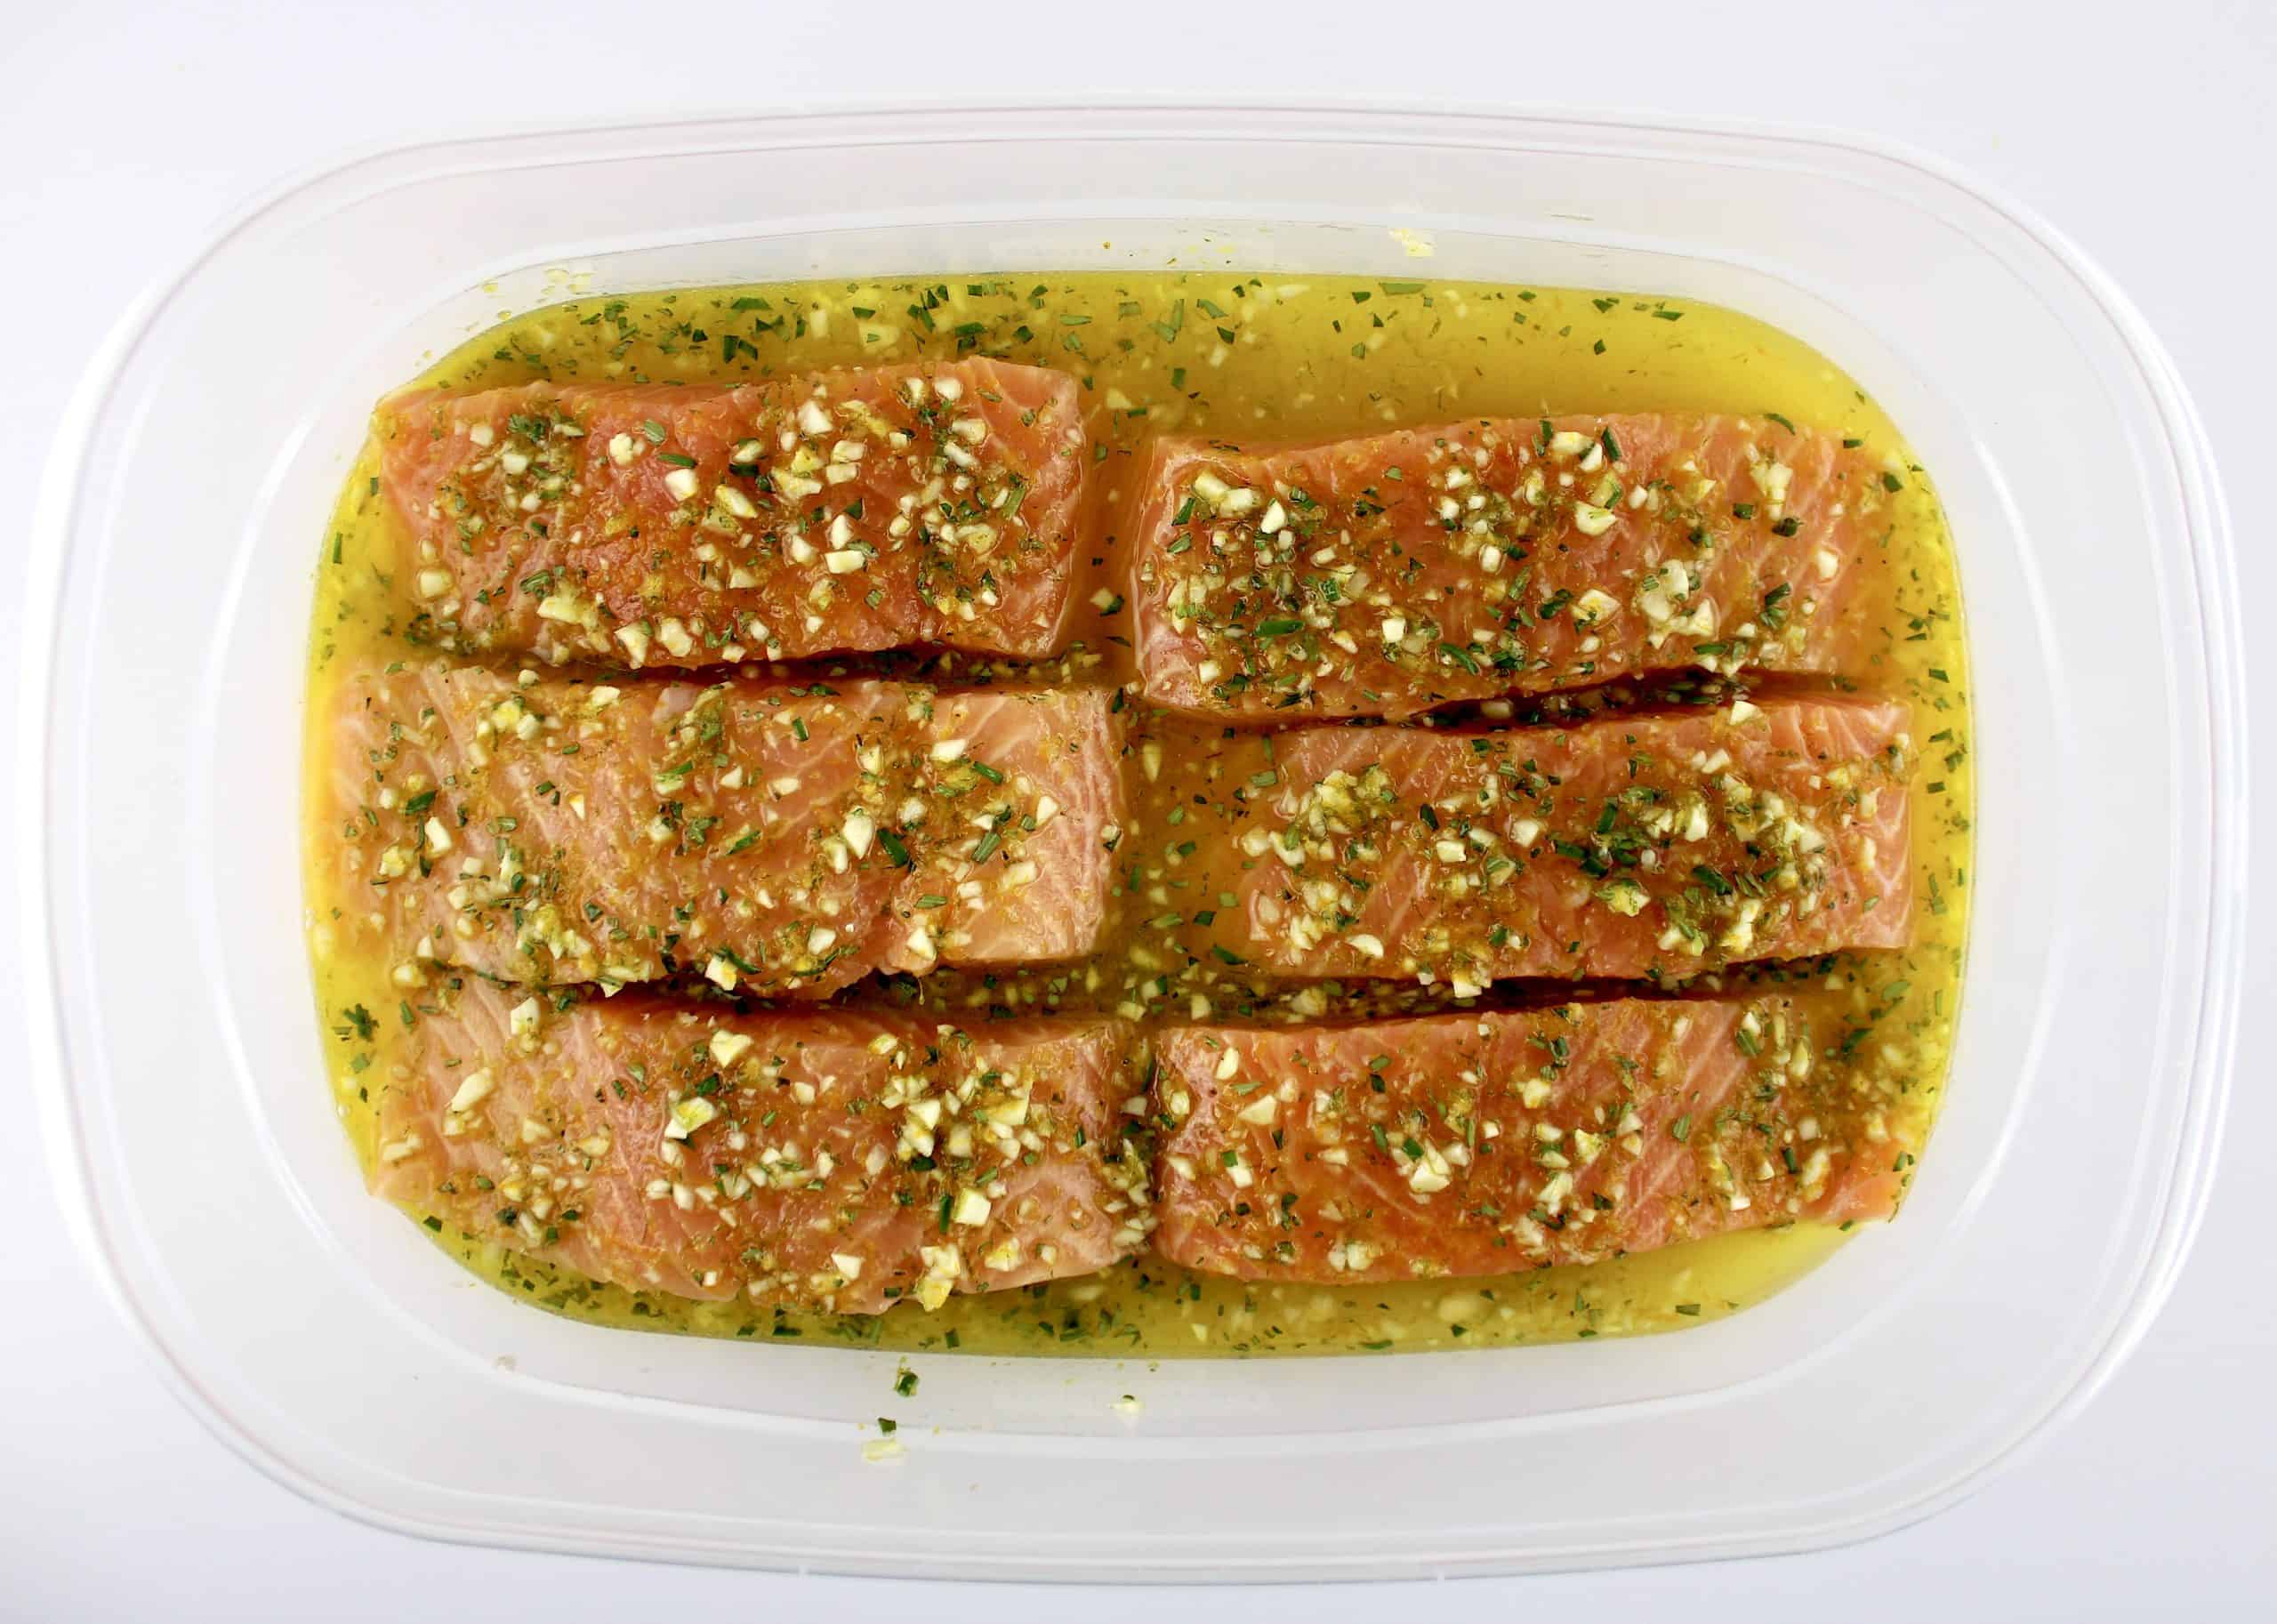 6 pieces of salmon in plastic container with citrus marinade